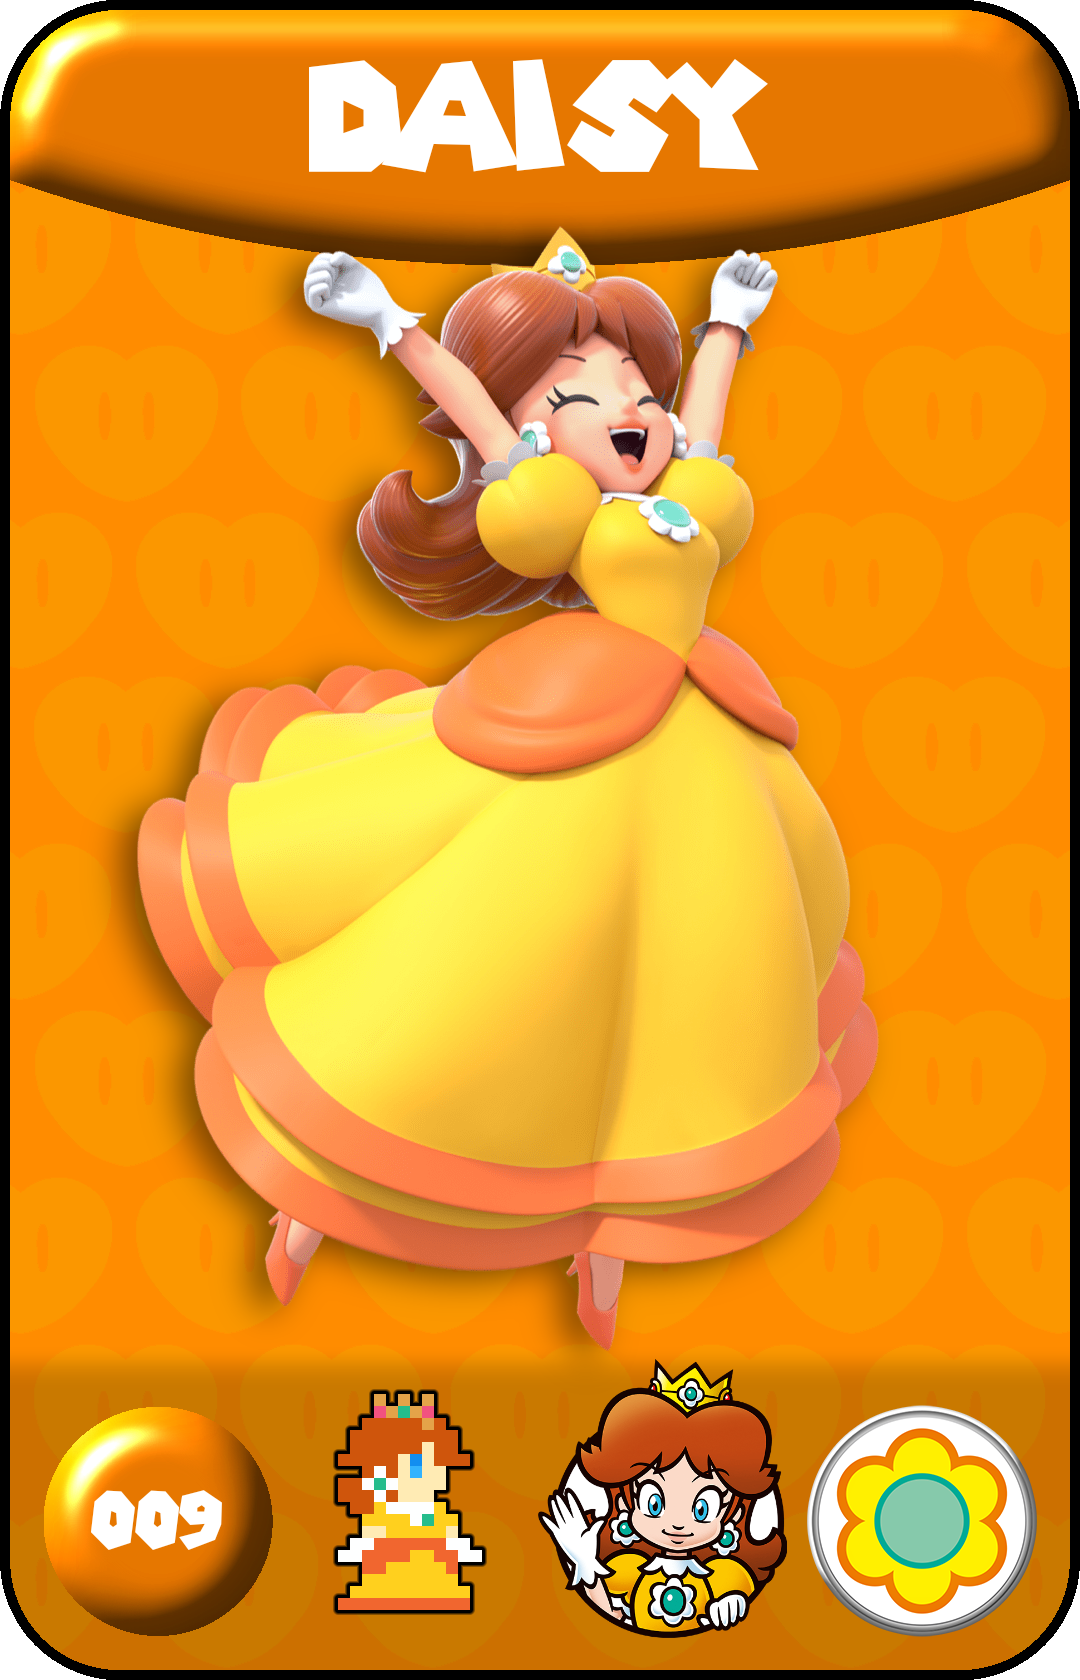 009 - Daisy (1).png